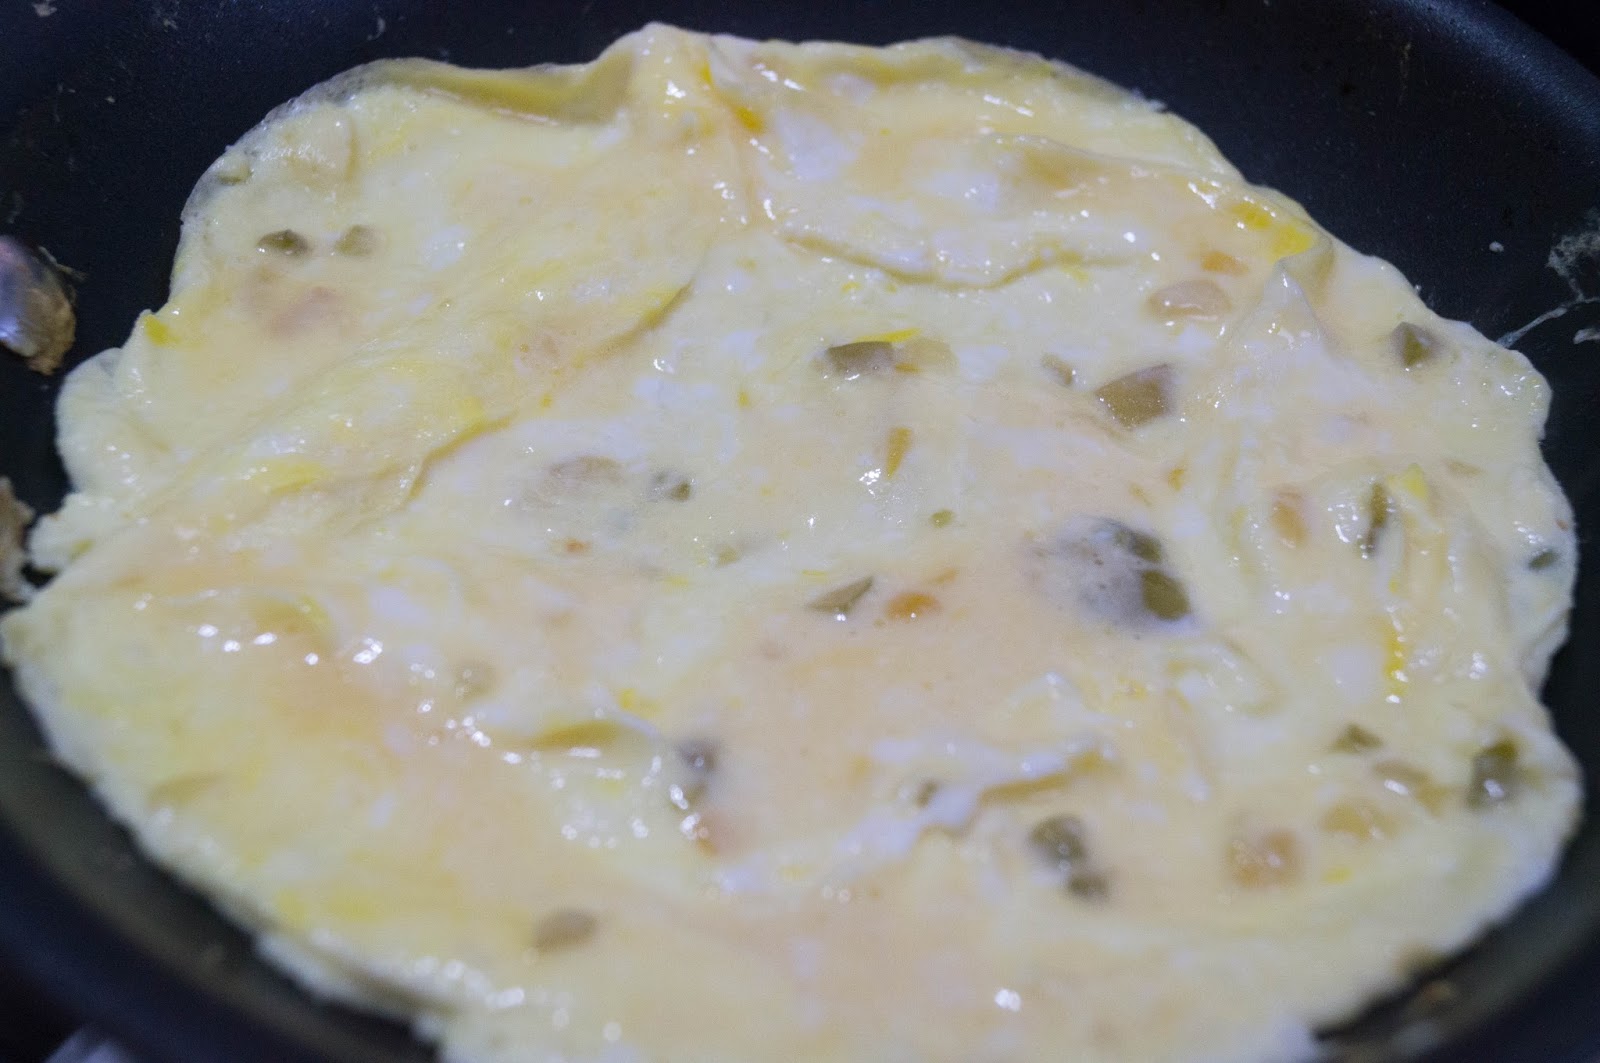 In the Kitchen with Jenny: How to Make a Basic Omelet